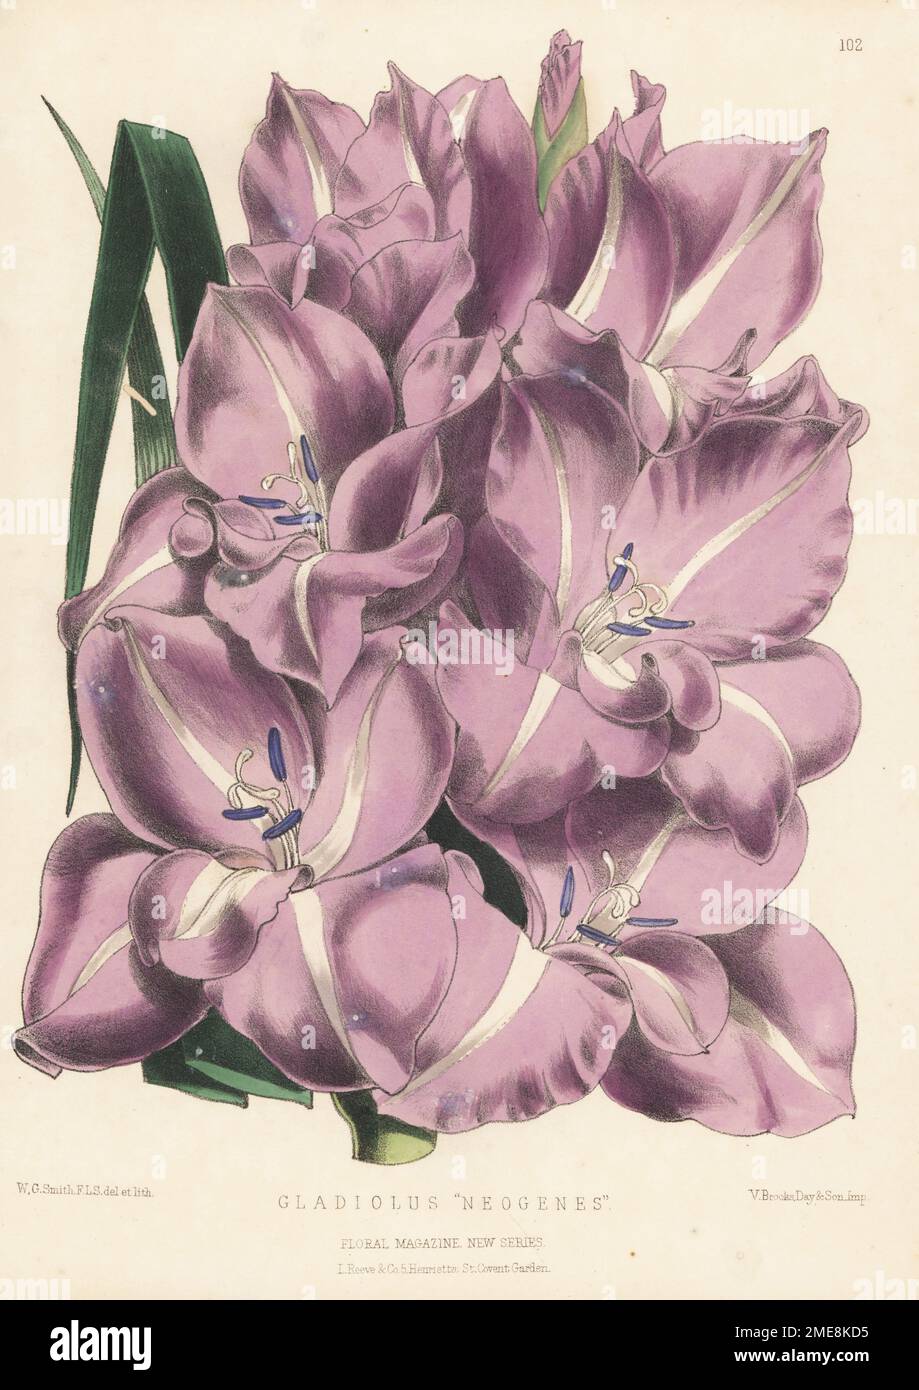 Gladiolus cultivar, Neogenes, hybrid developed by Kelway and Sons nursery, Langport, Somerset. Handcolored botanical illustration drawn and lithographed by Worthington George Smith from Henry Honywood Dombrain's Floral Magazine, New Series, Volume 3, L. Reeve, London, 1874. Lithograph printed by Vincent Brooks, Day & Son. Stock Photo